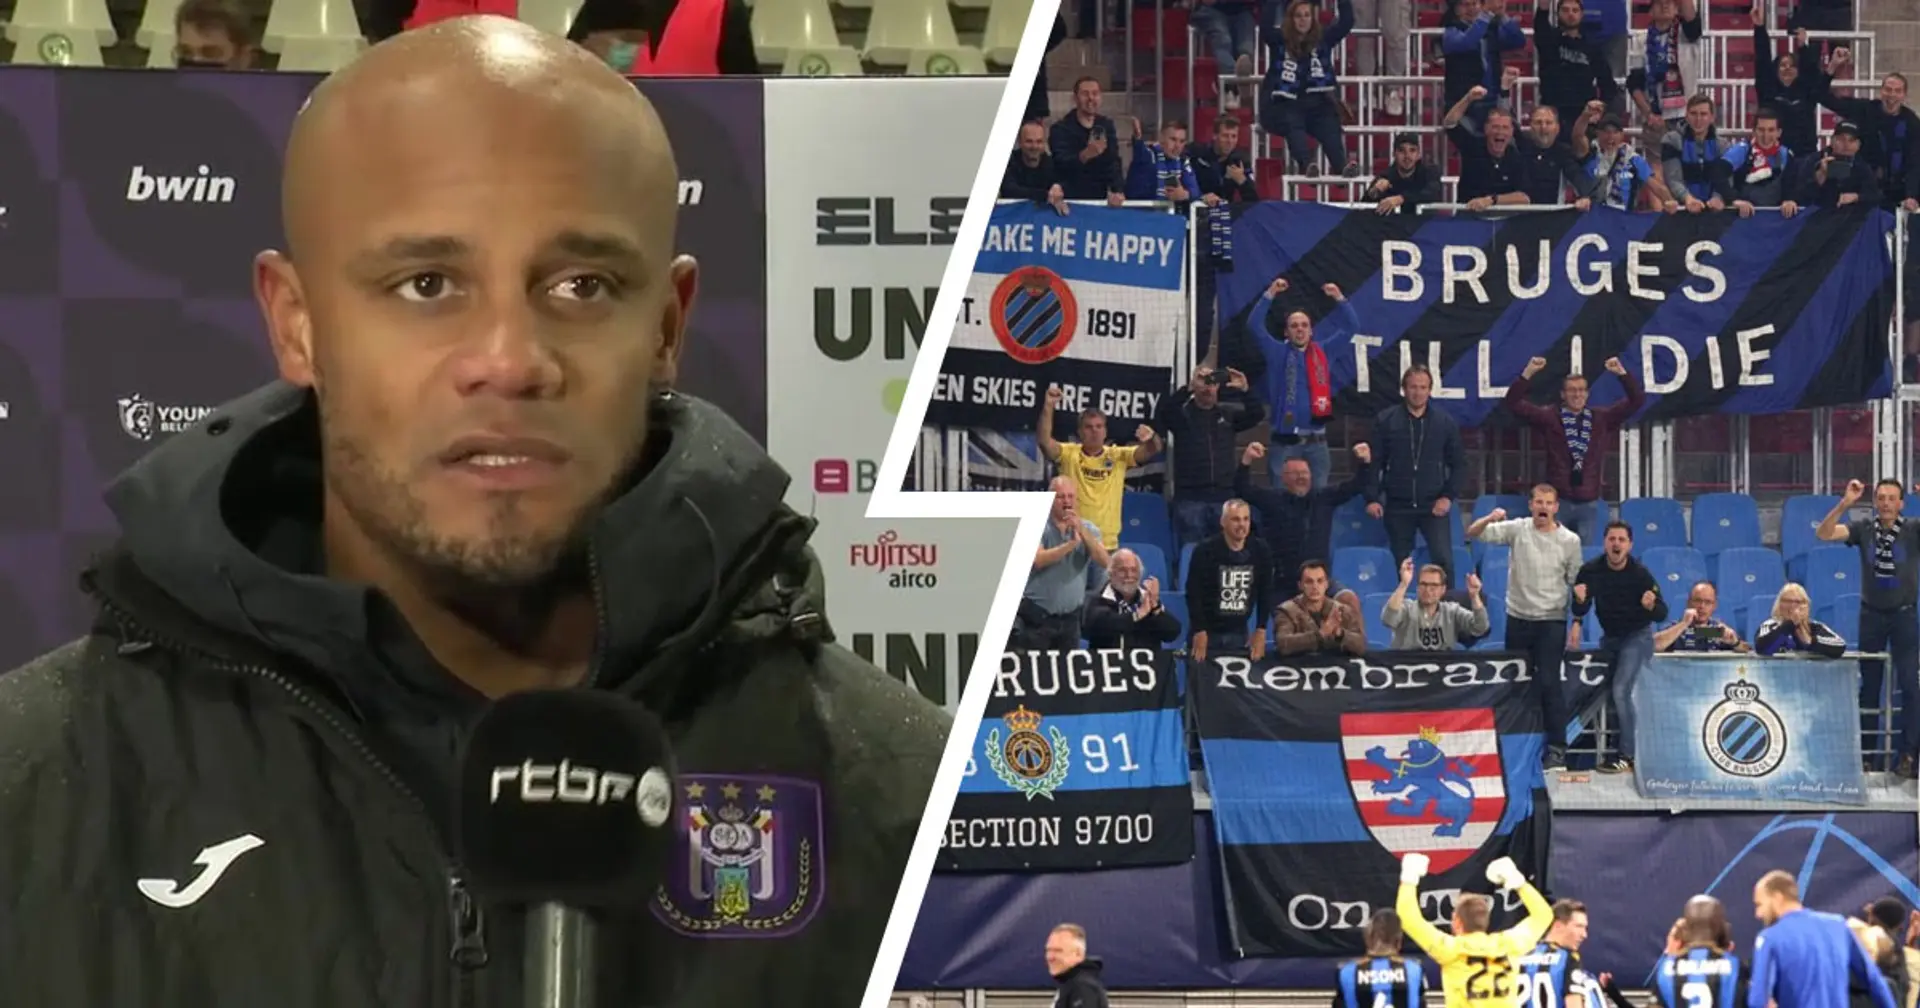 Anderlecht manager Kompany accuses Club Brugge fans of racism: 'We were called monkeys the whole match'